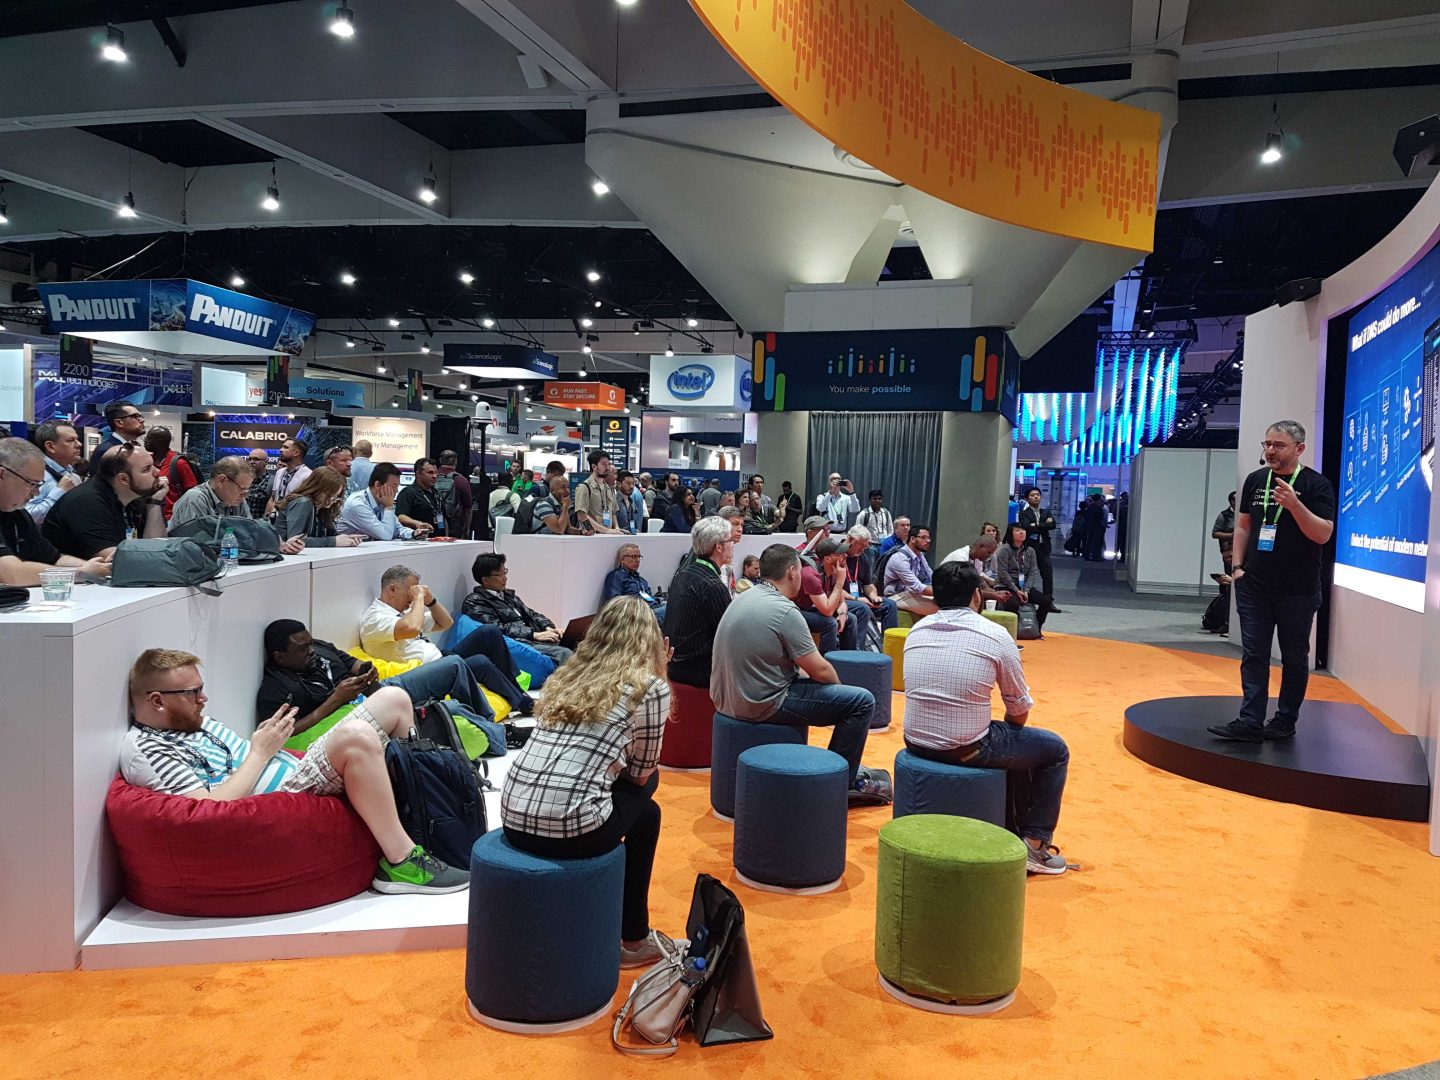 At Cisco Live 2019, BlueCat Chief Strategy Officer Andrew Wertkin gave a talk about intent-based networking to booth visitors